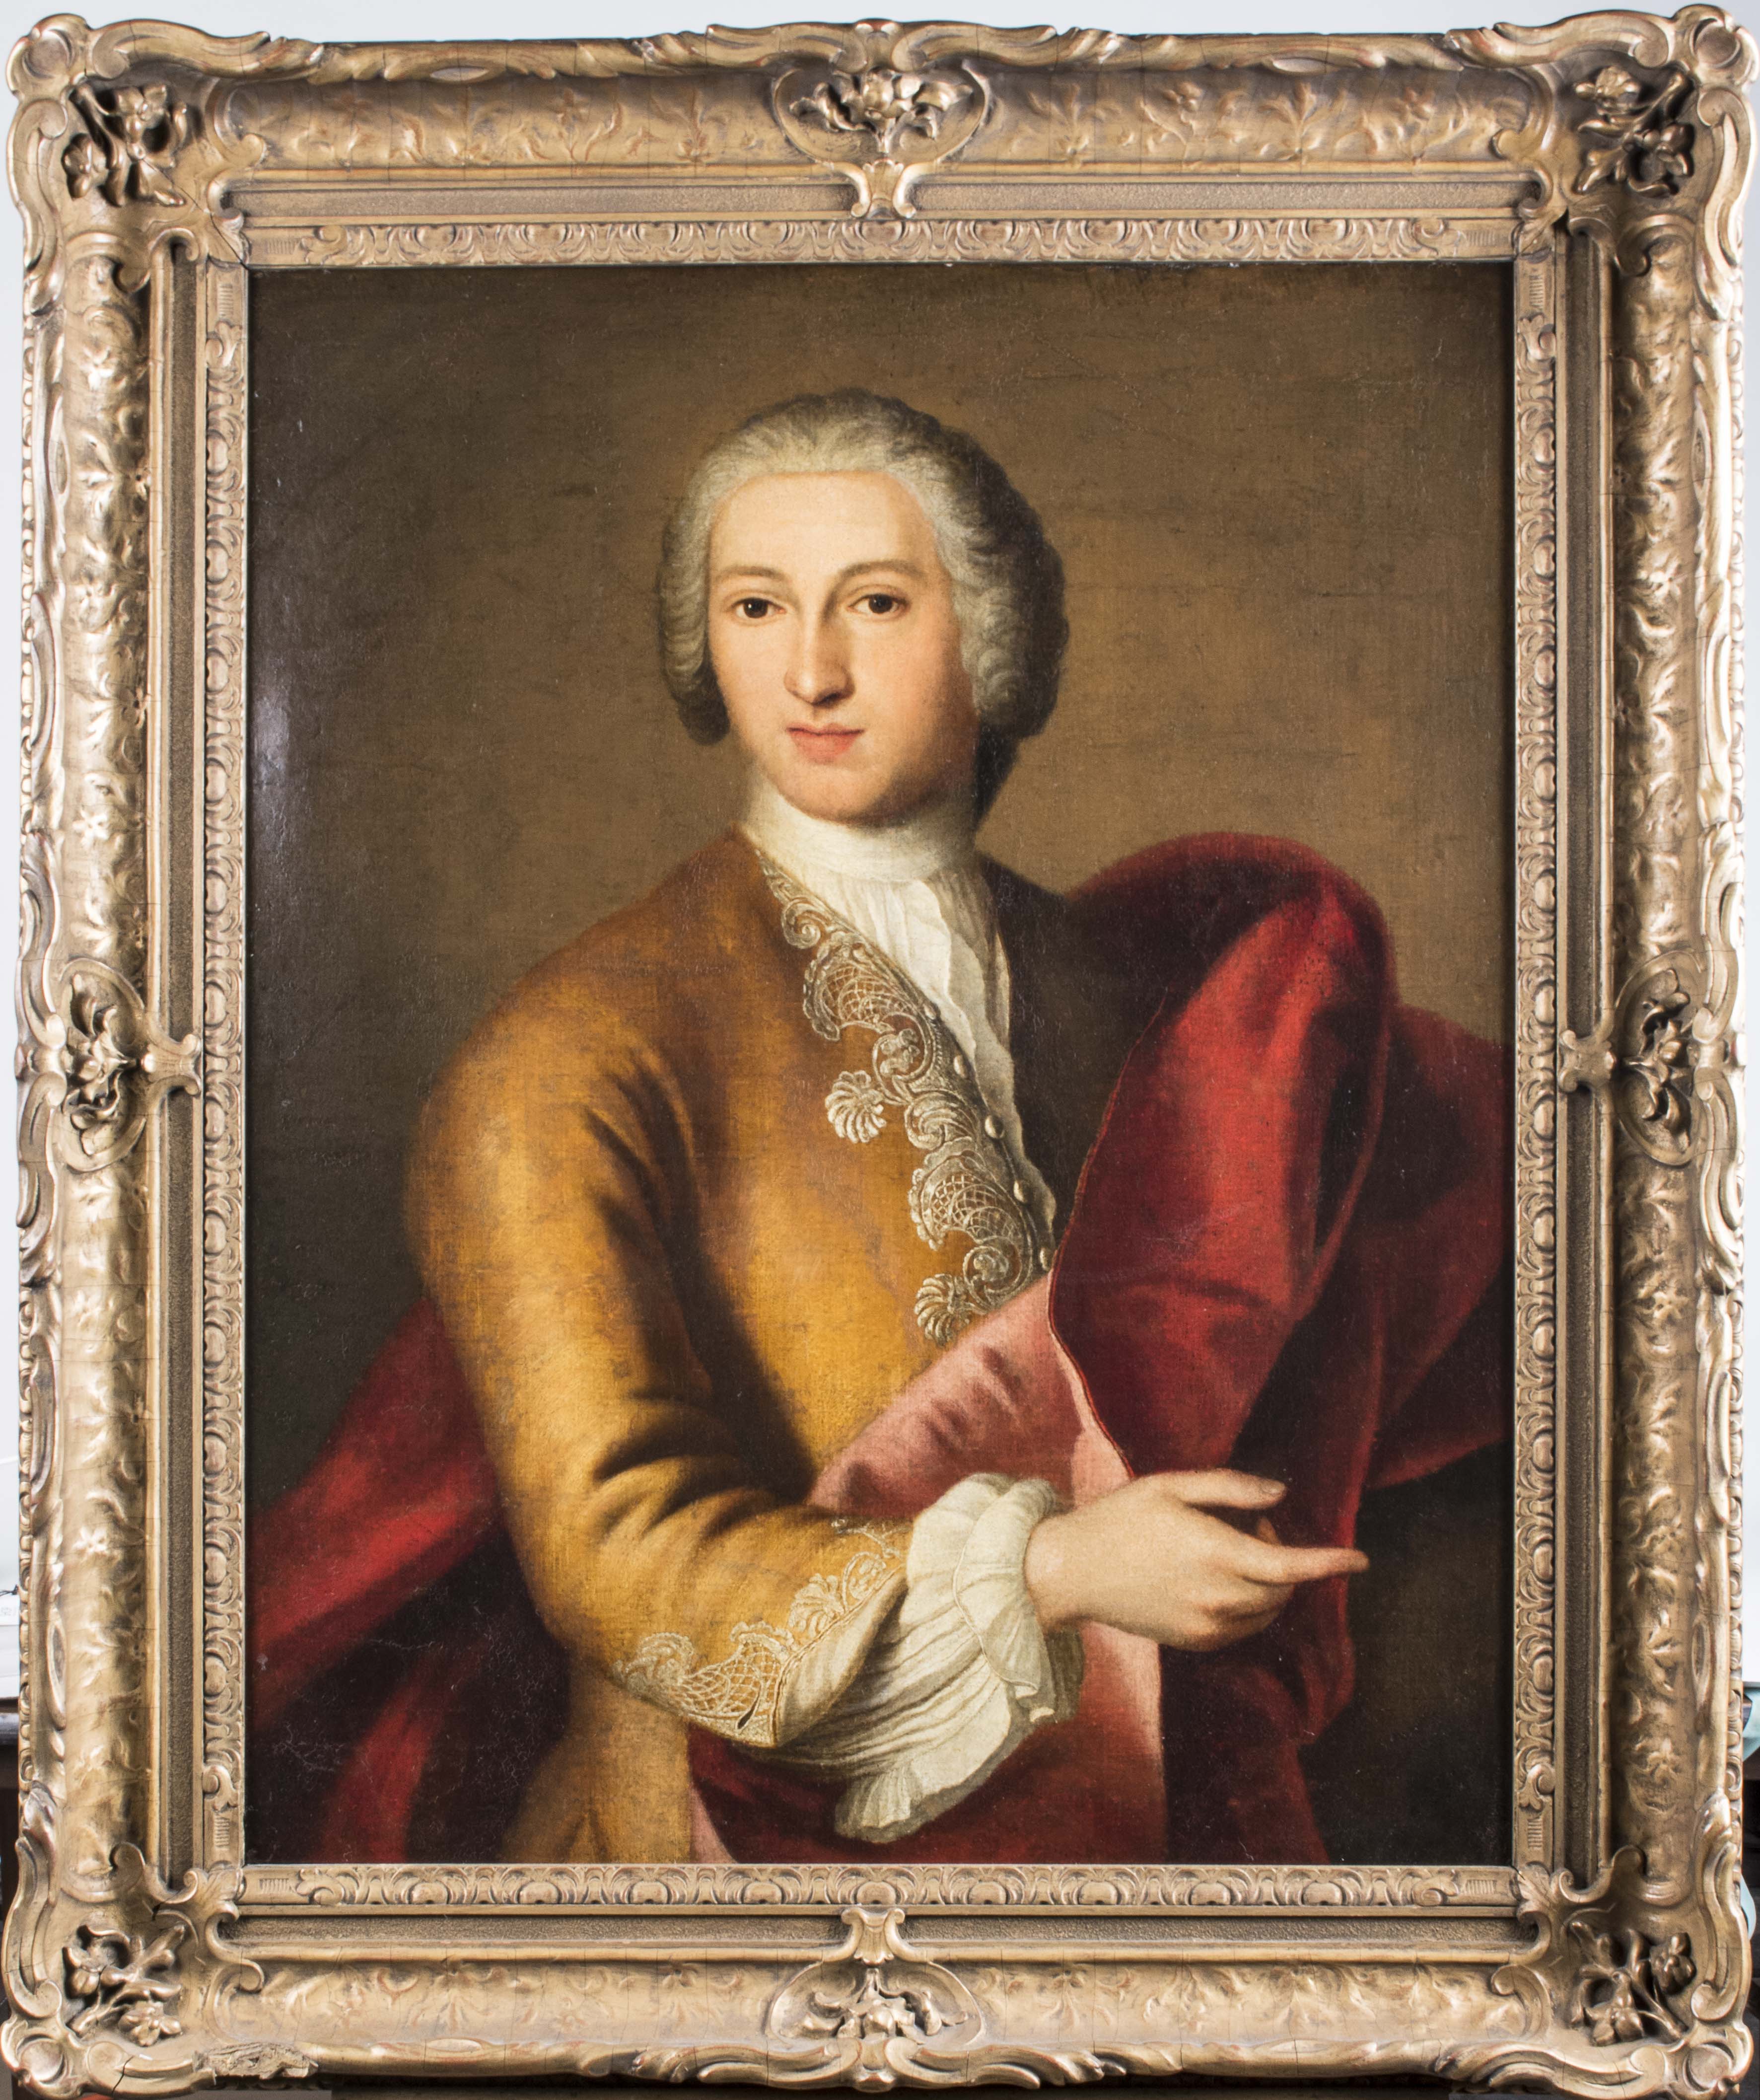 Attributed to Sir Godfrey Kneller (British, 1646-1723) ‘Portrait of a Young Man,’ oil on canvas (est. $15,000-$20,000). Capo Auction image